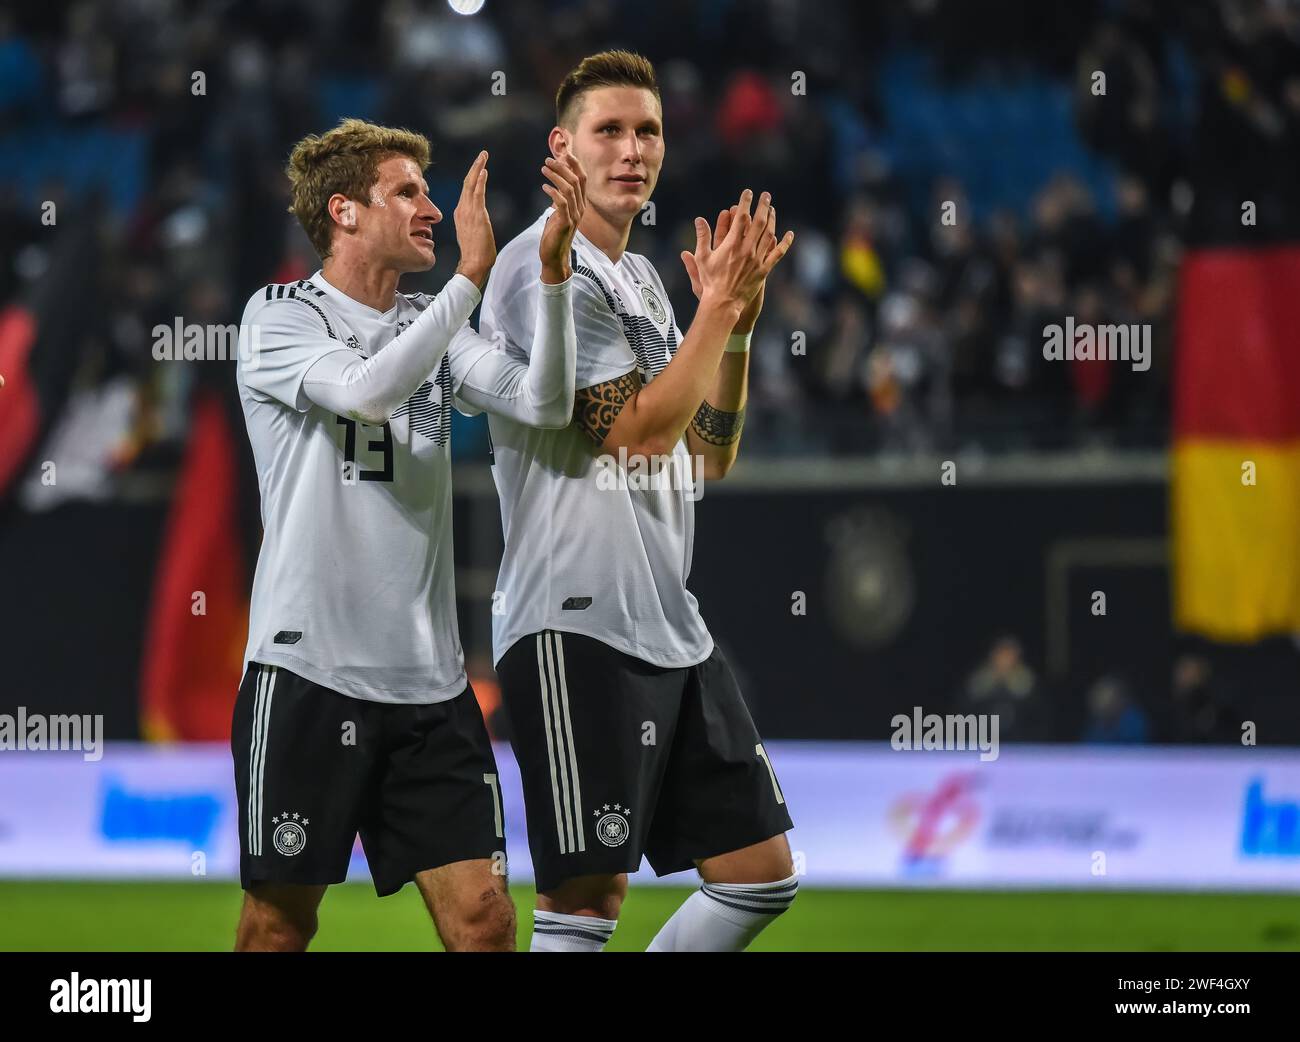 Leipzig, Germany – November 15, 2018. Germany national football team players Thomas Muller and Niklas Sule celebrating victory in during international Stock Photo